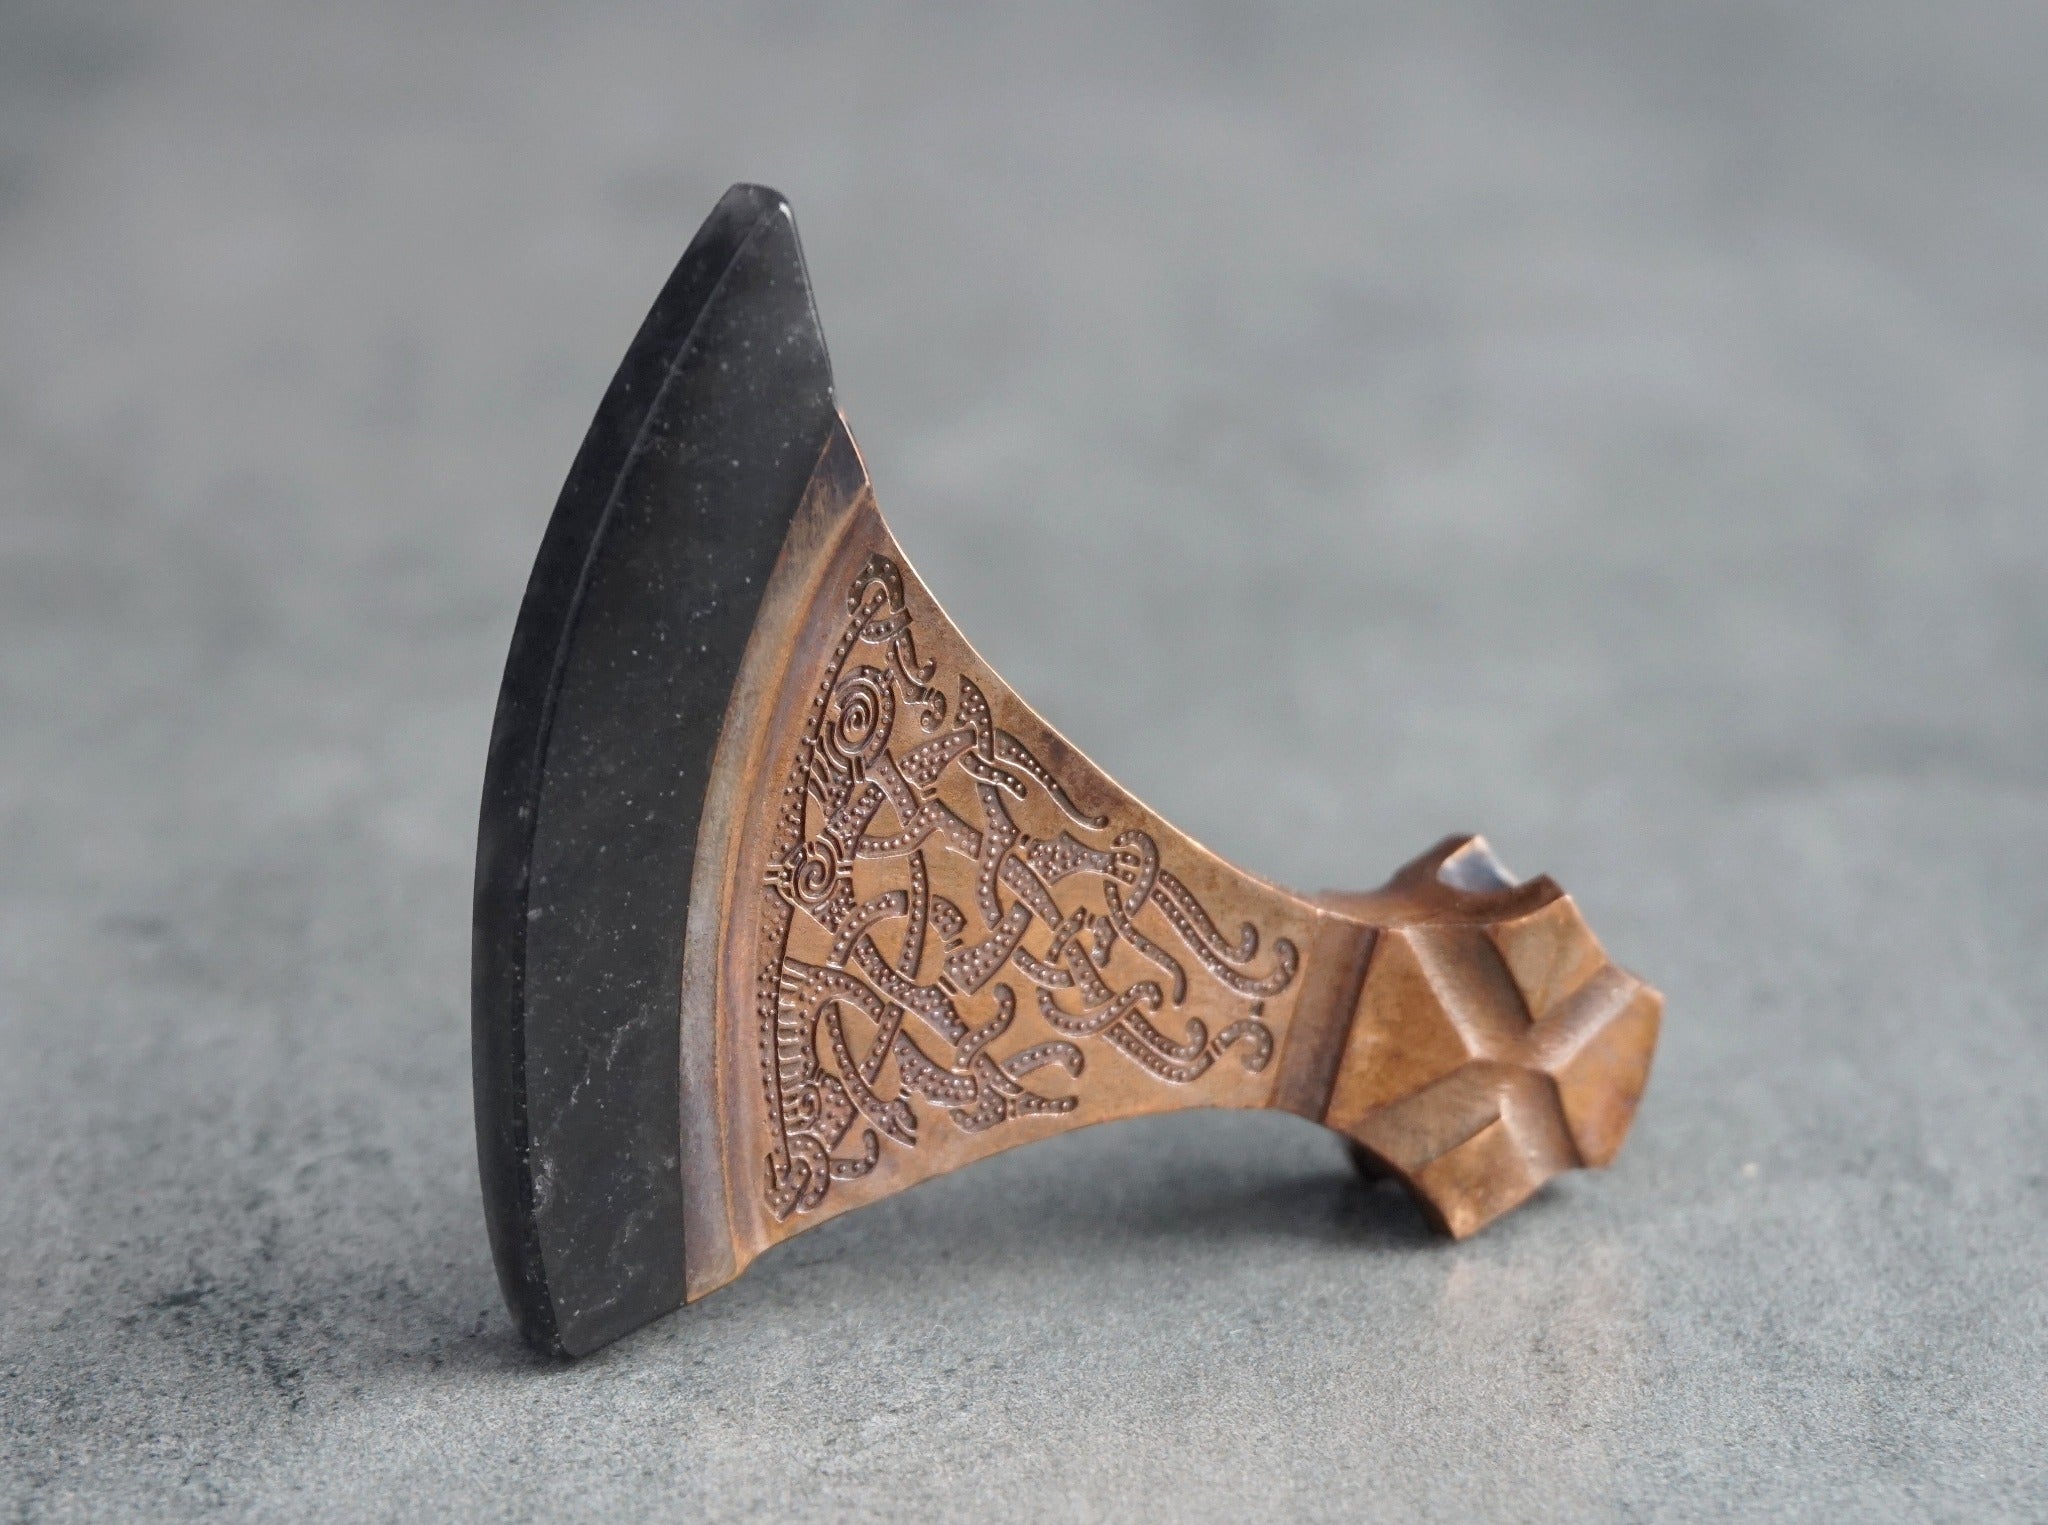 black obsidian blade of a bronze axe with white inclusions on the stone